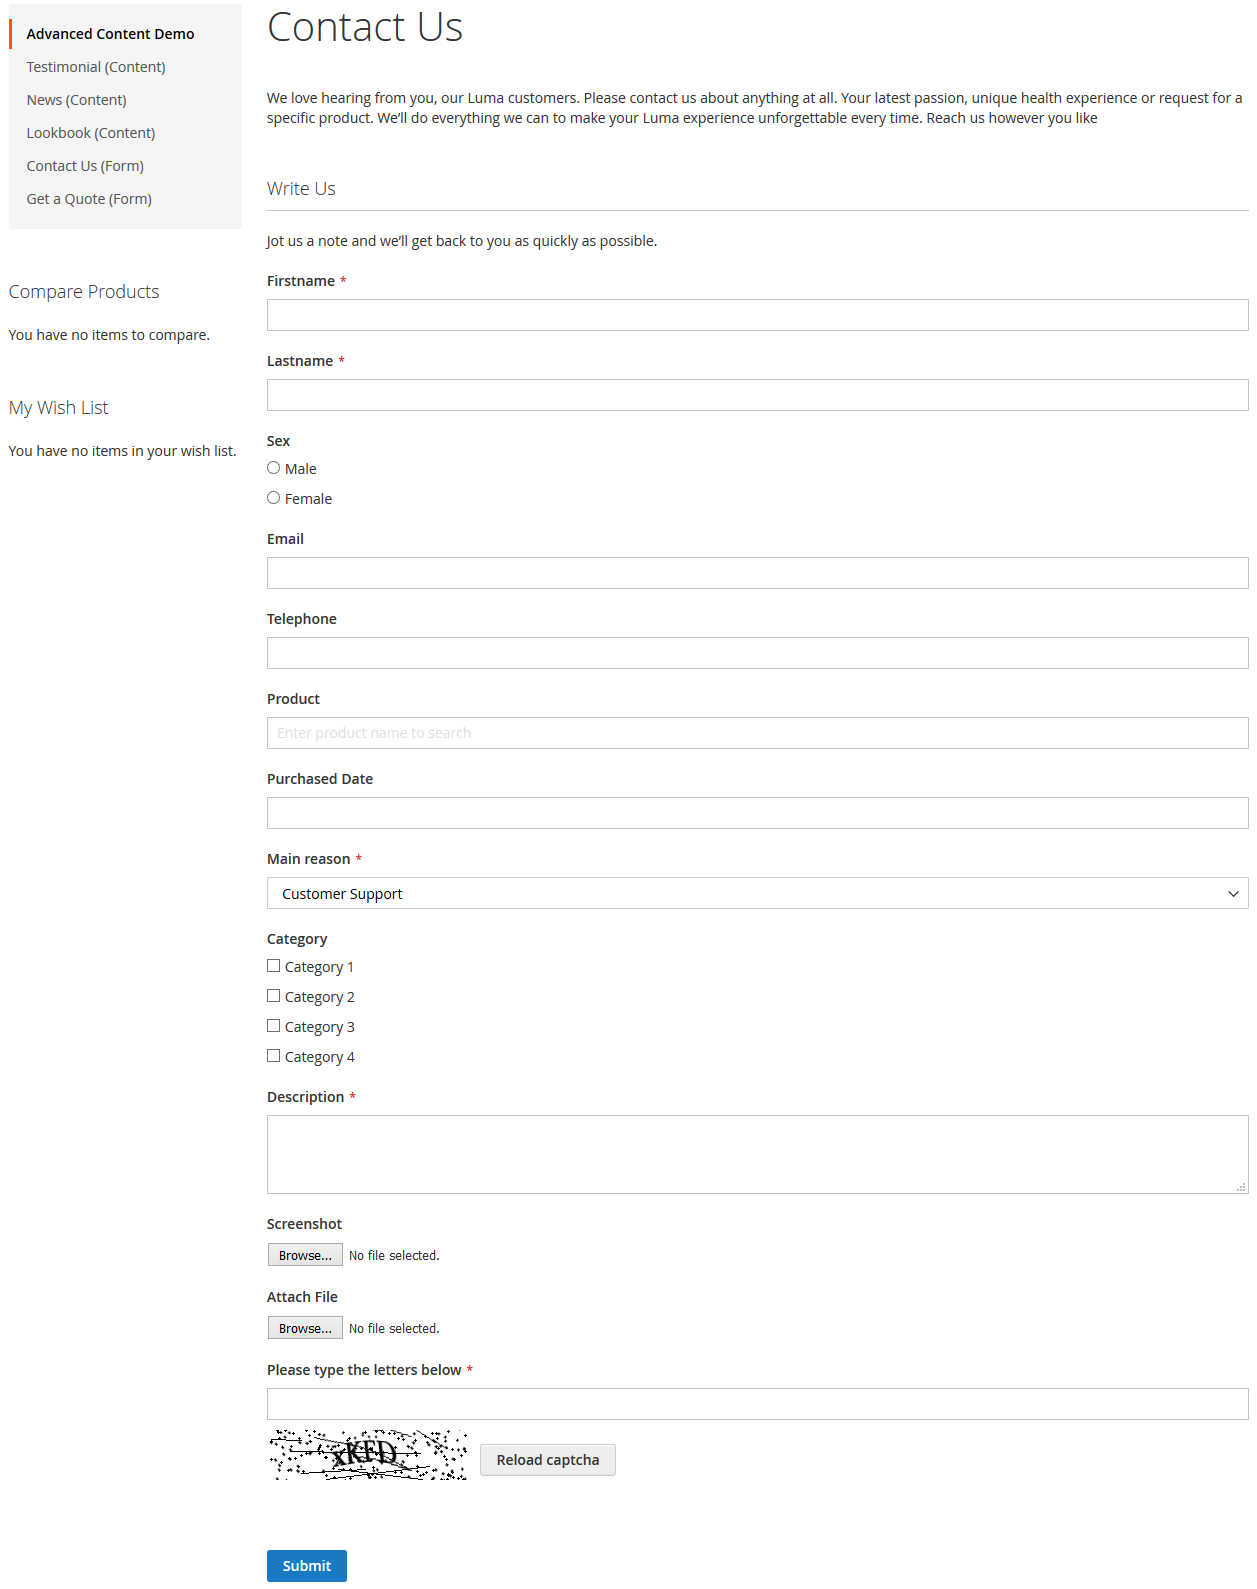 Advanced Content Manager Magento 2 extension - Image 18